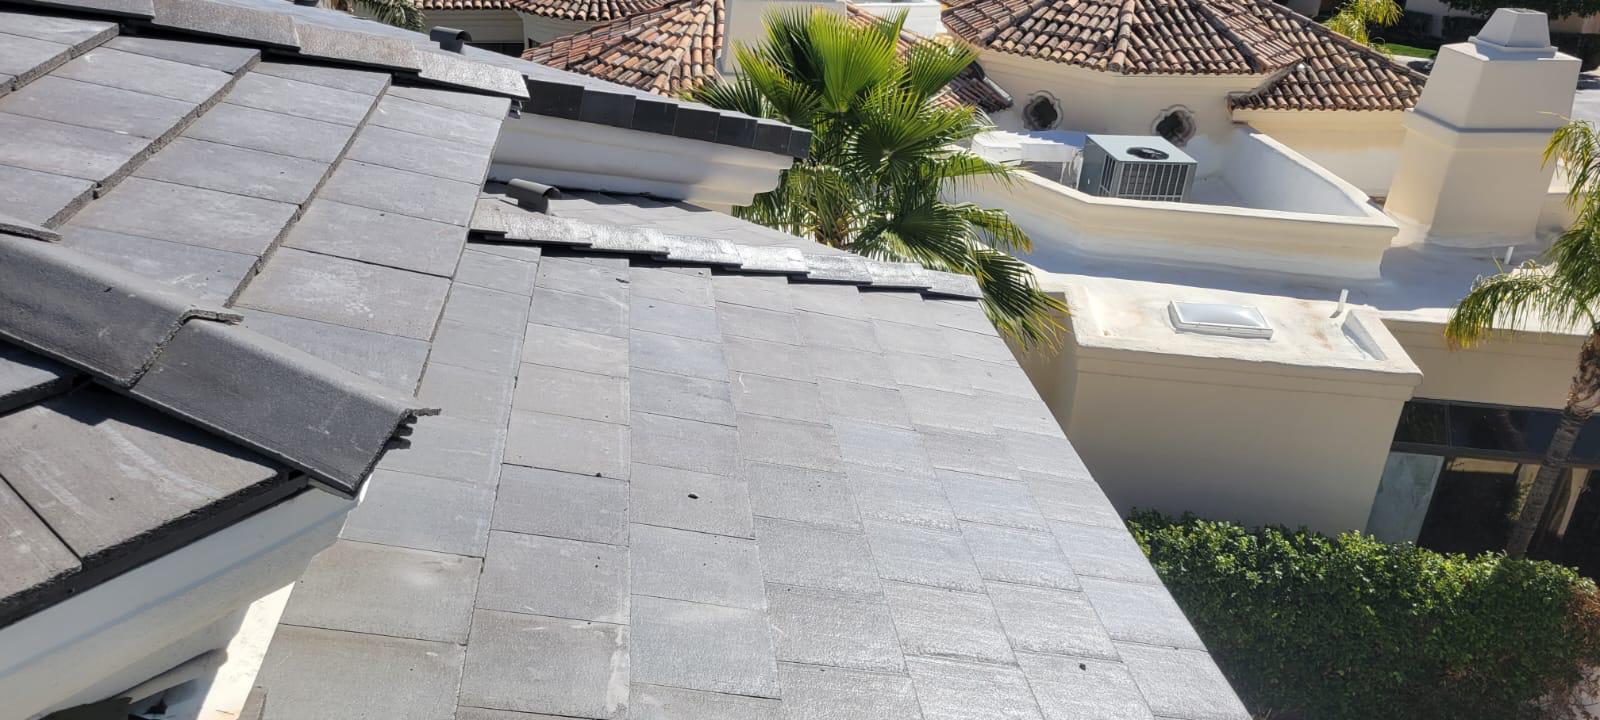 A black tile roof undergoes re-roofing in Scottsdale.